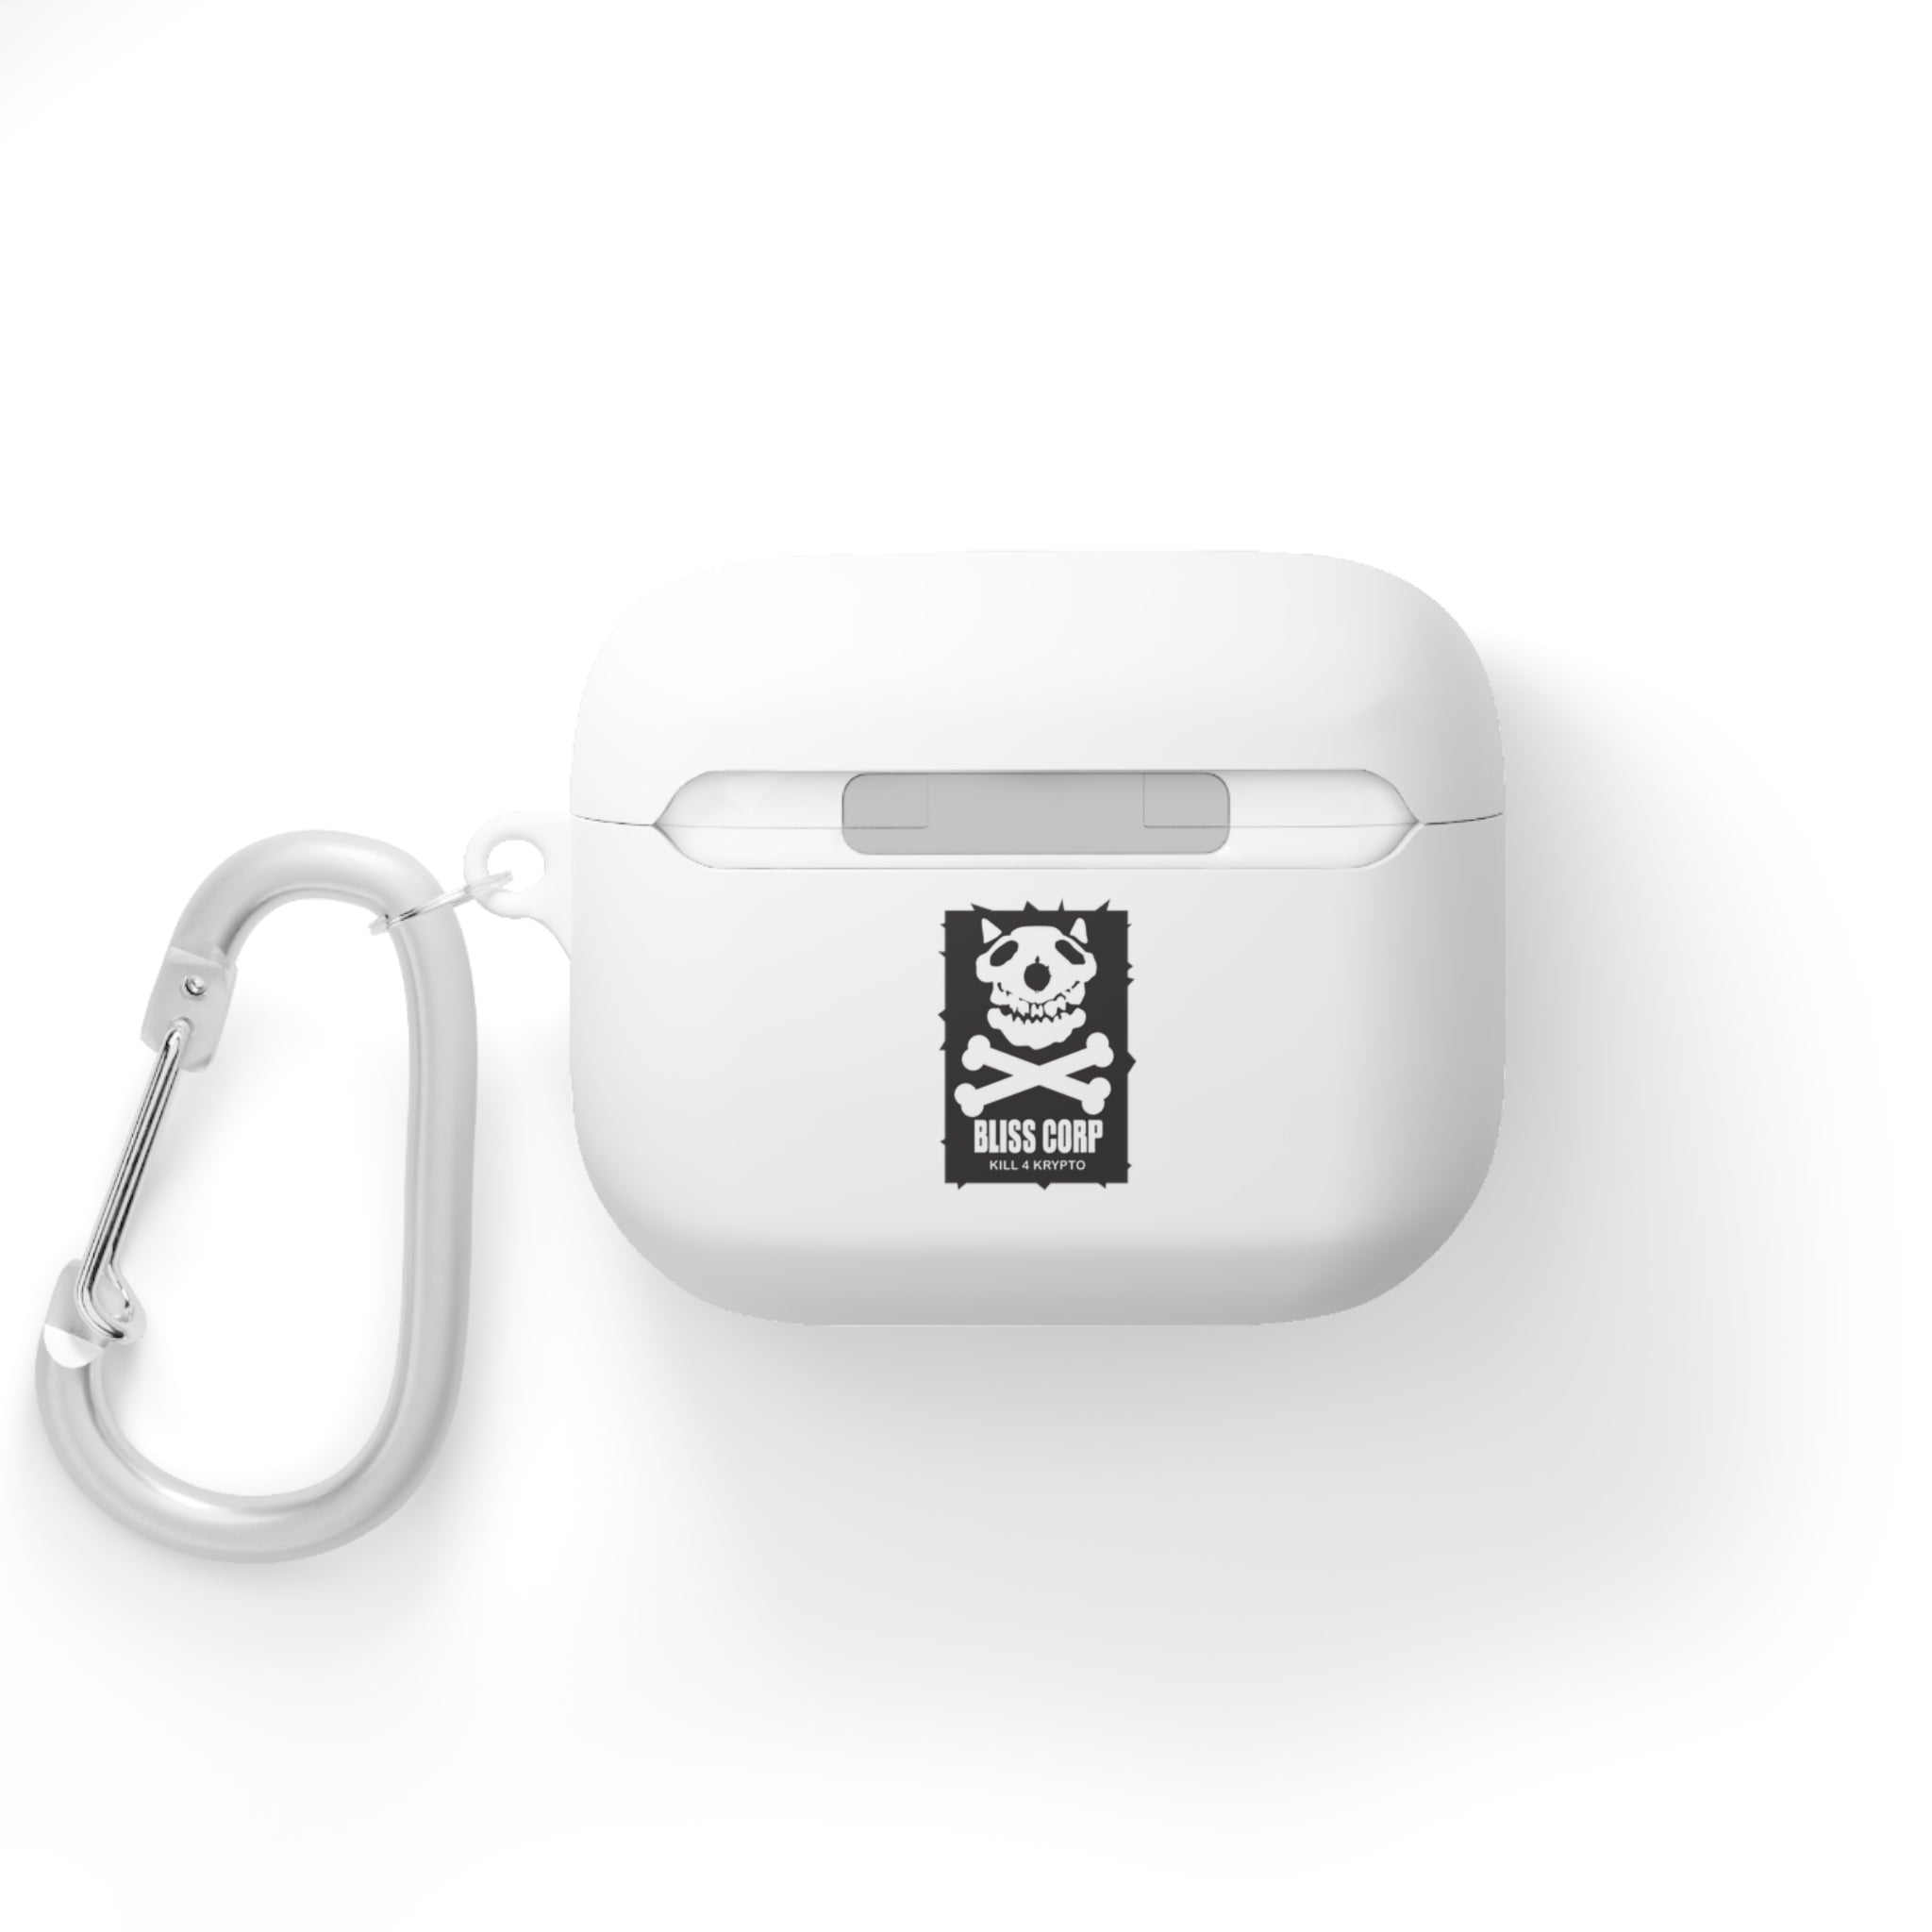 BLISSCORP AirPods Pro Case Cover